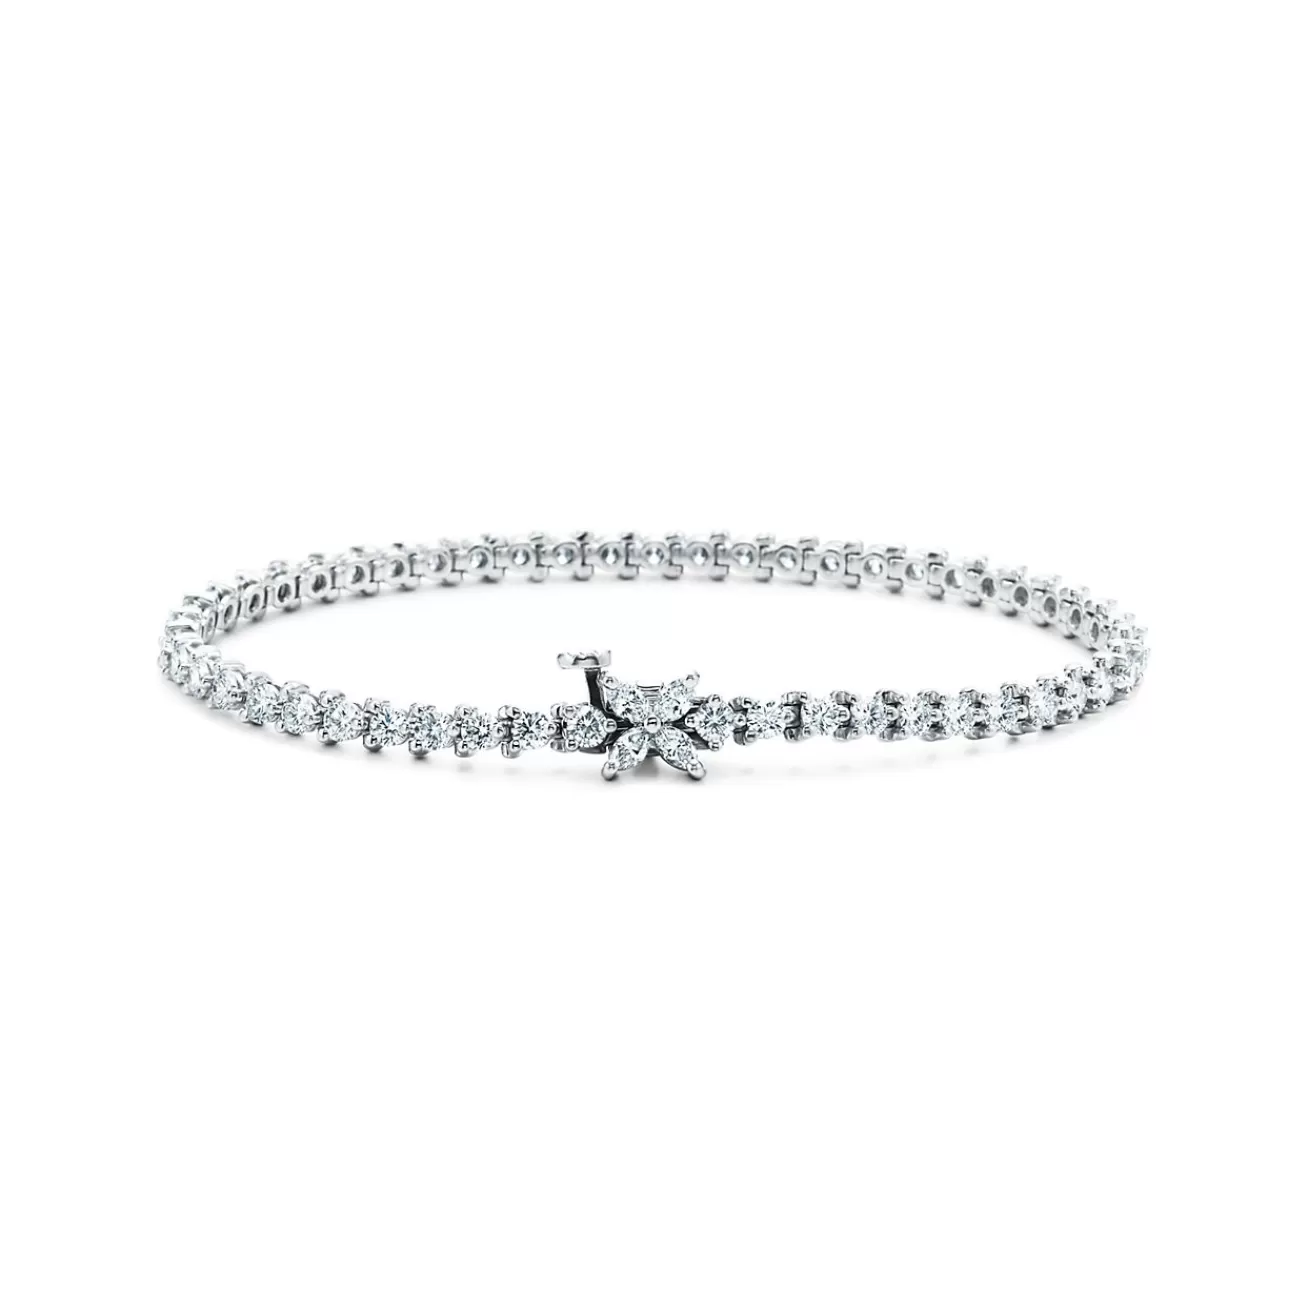 Tiffany & Co. Tiffany Victoria® Tennis Bracelet in Platinum with Diamonds | ^ Bracelets | Gifts for Her